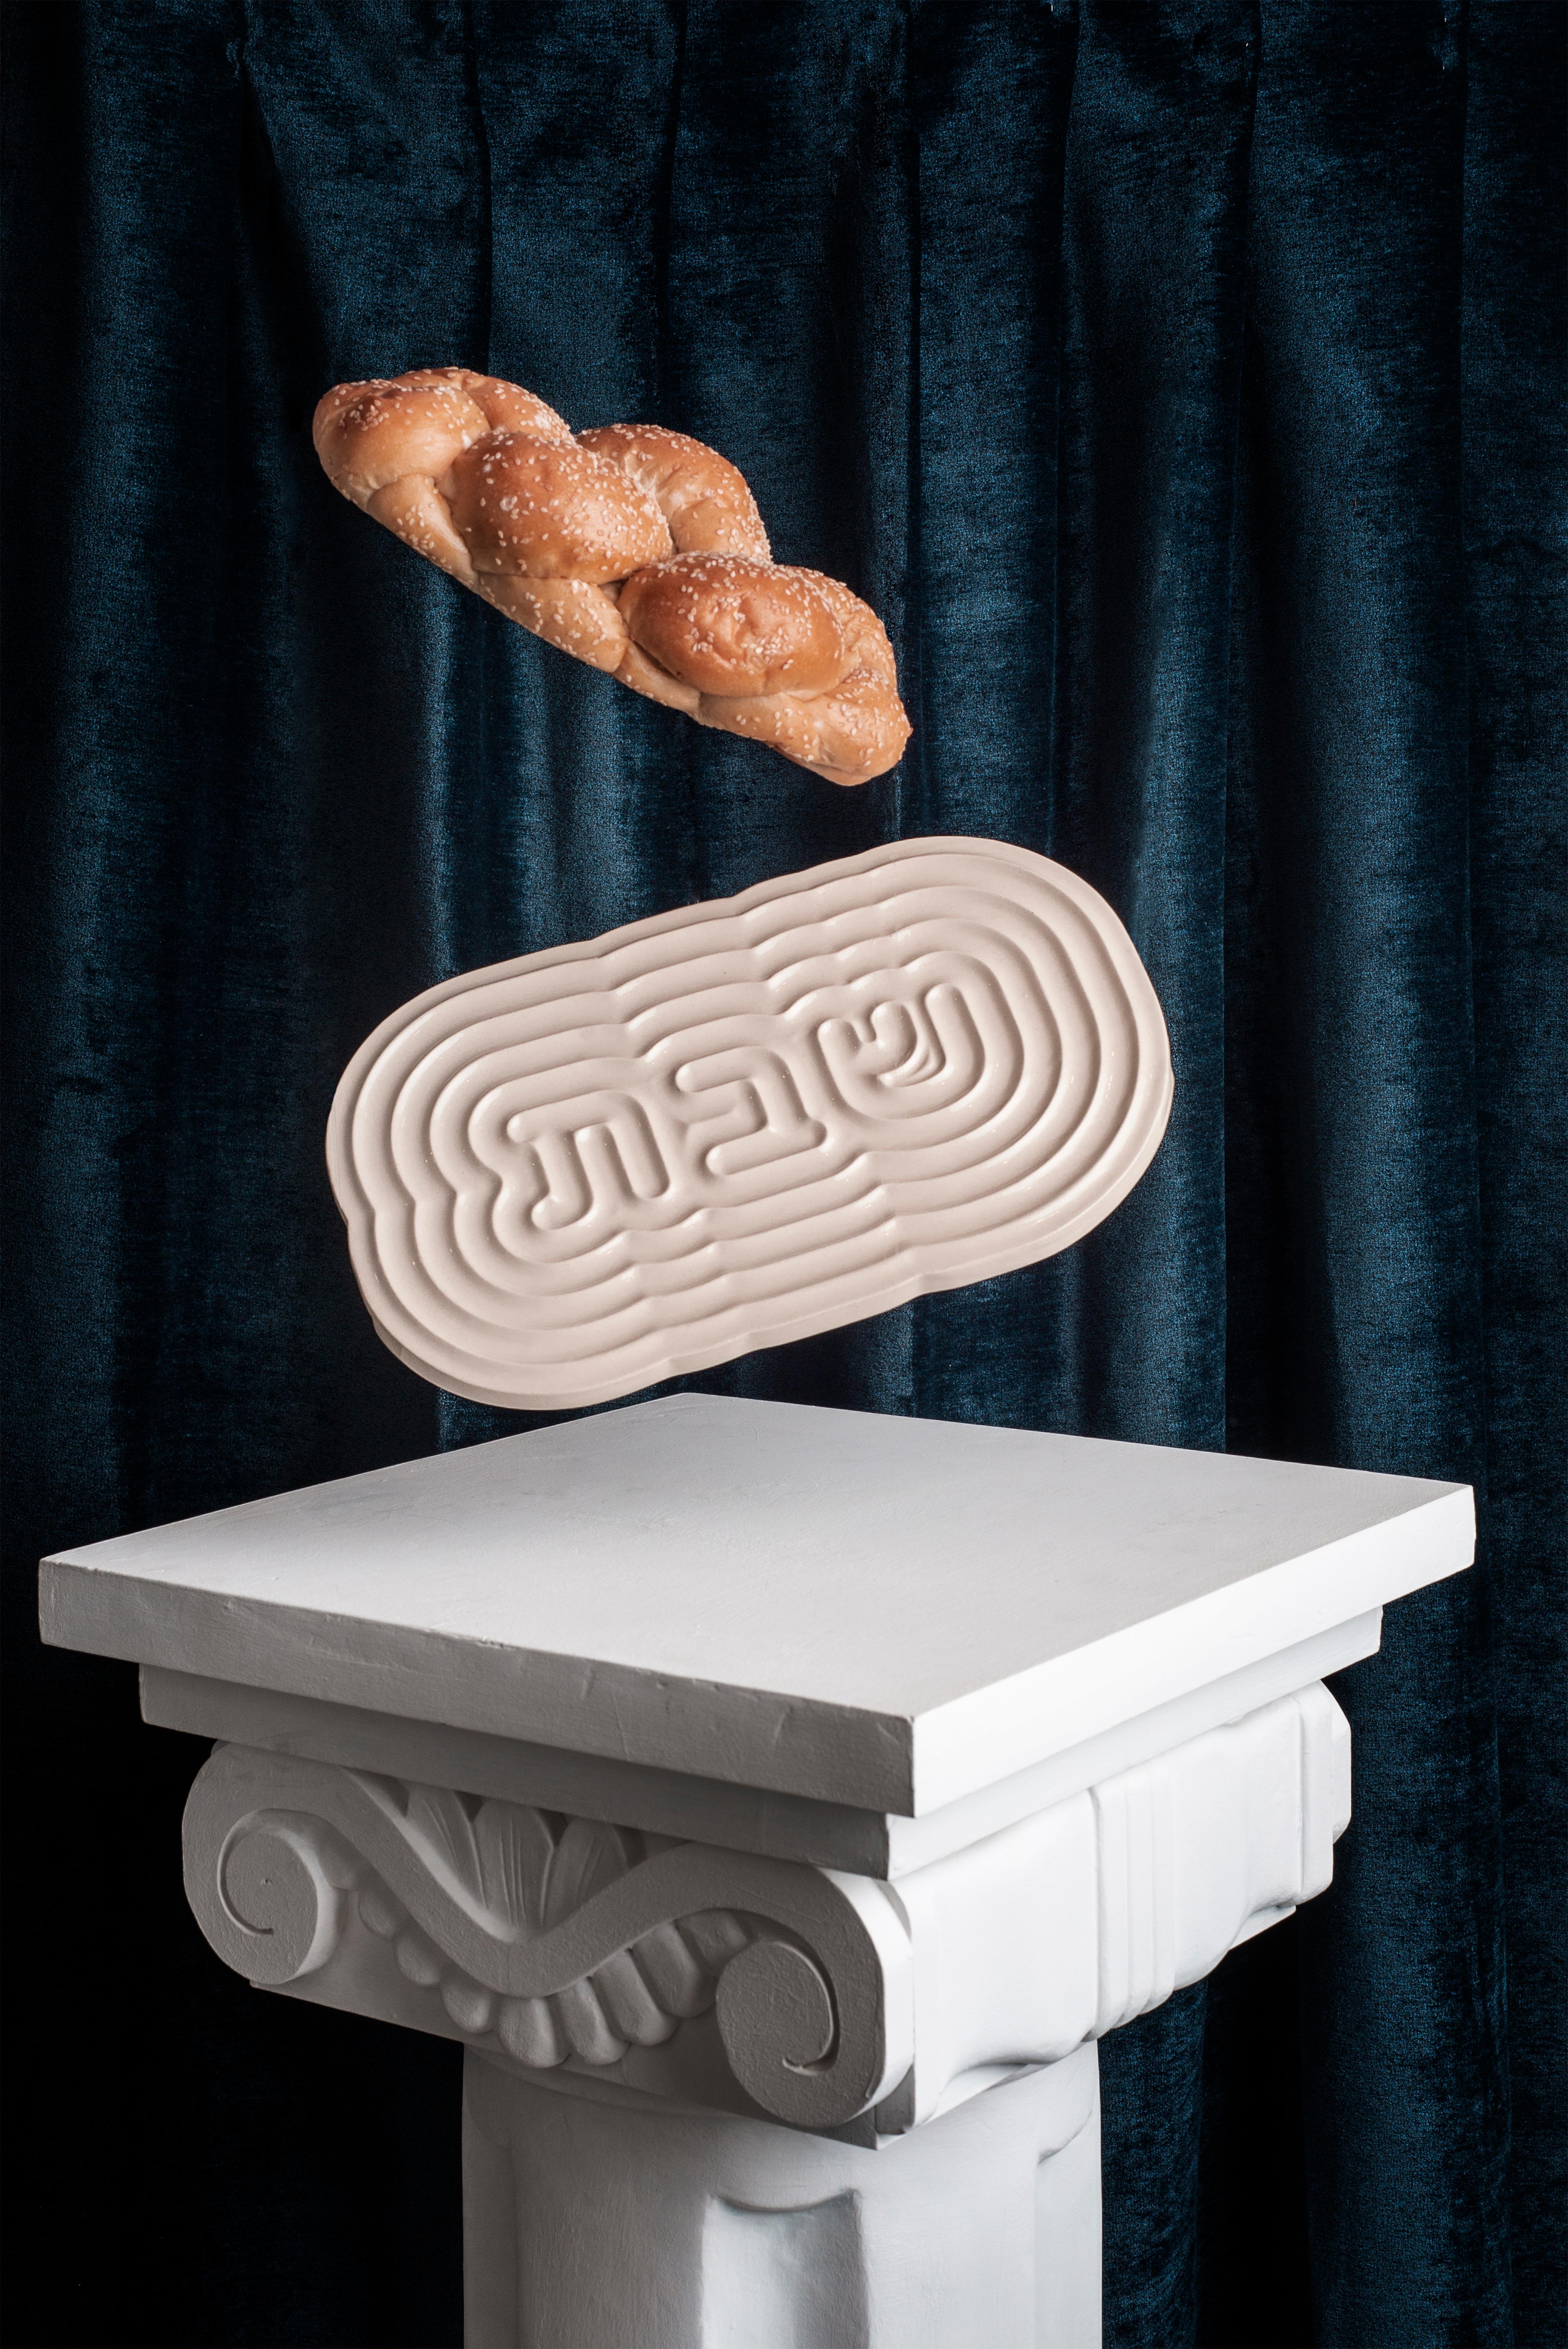 Introducing a masterpiece of Judaic artistry, the Bruci Shabbat tray is a true testament to the essence of Shabbat. Embodying the timeless Jewish values of creation and light, this exquisite ceramic tray is the perfect way to bring sanctity to your